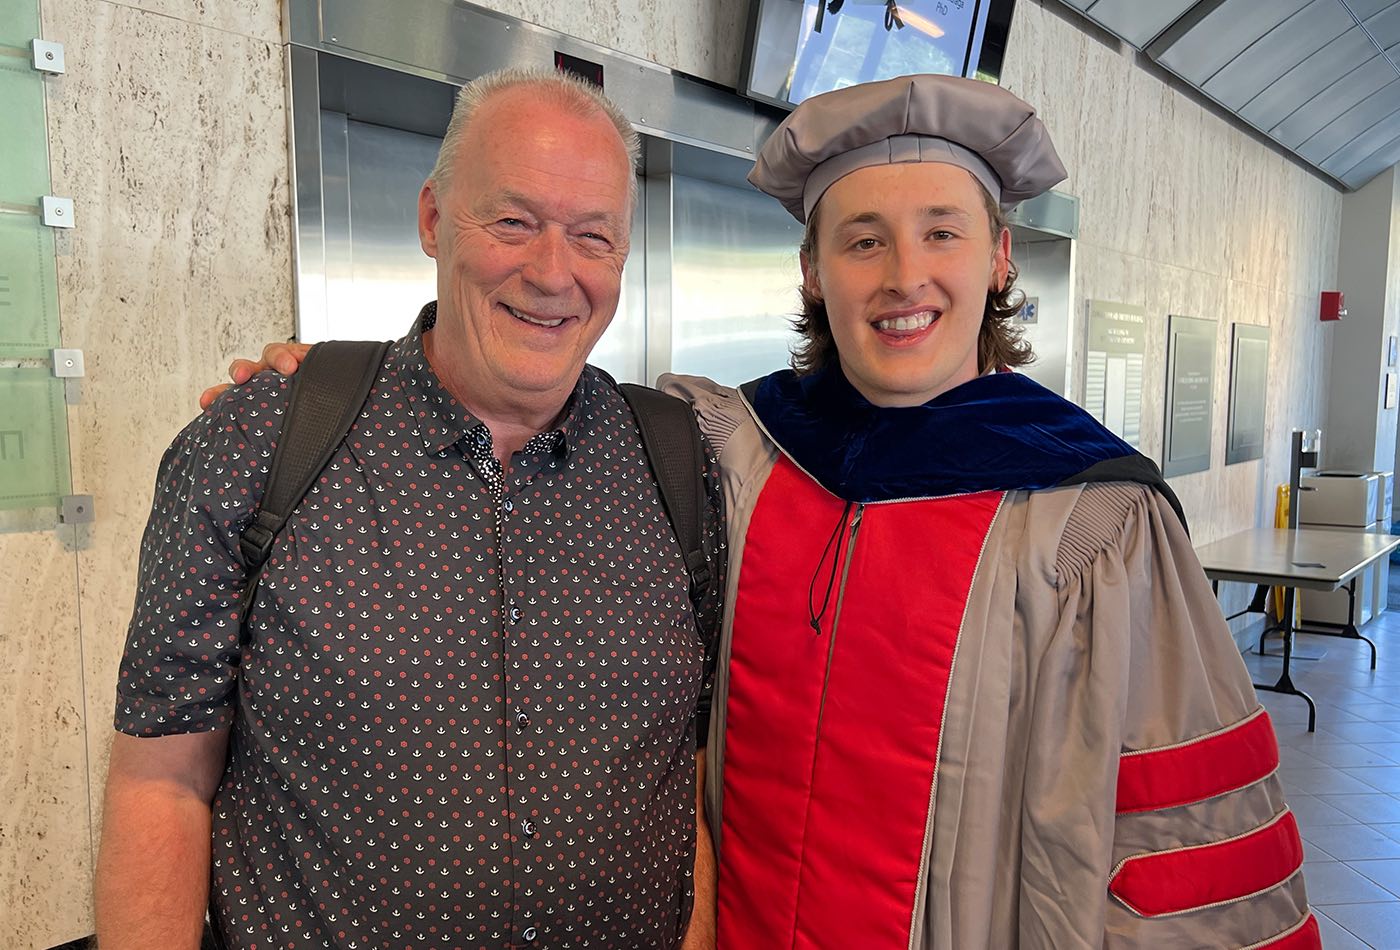 Leo Delage-Laurin, a PhD recipient, smiles in his regalia beside an older man, his guest.